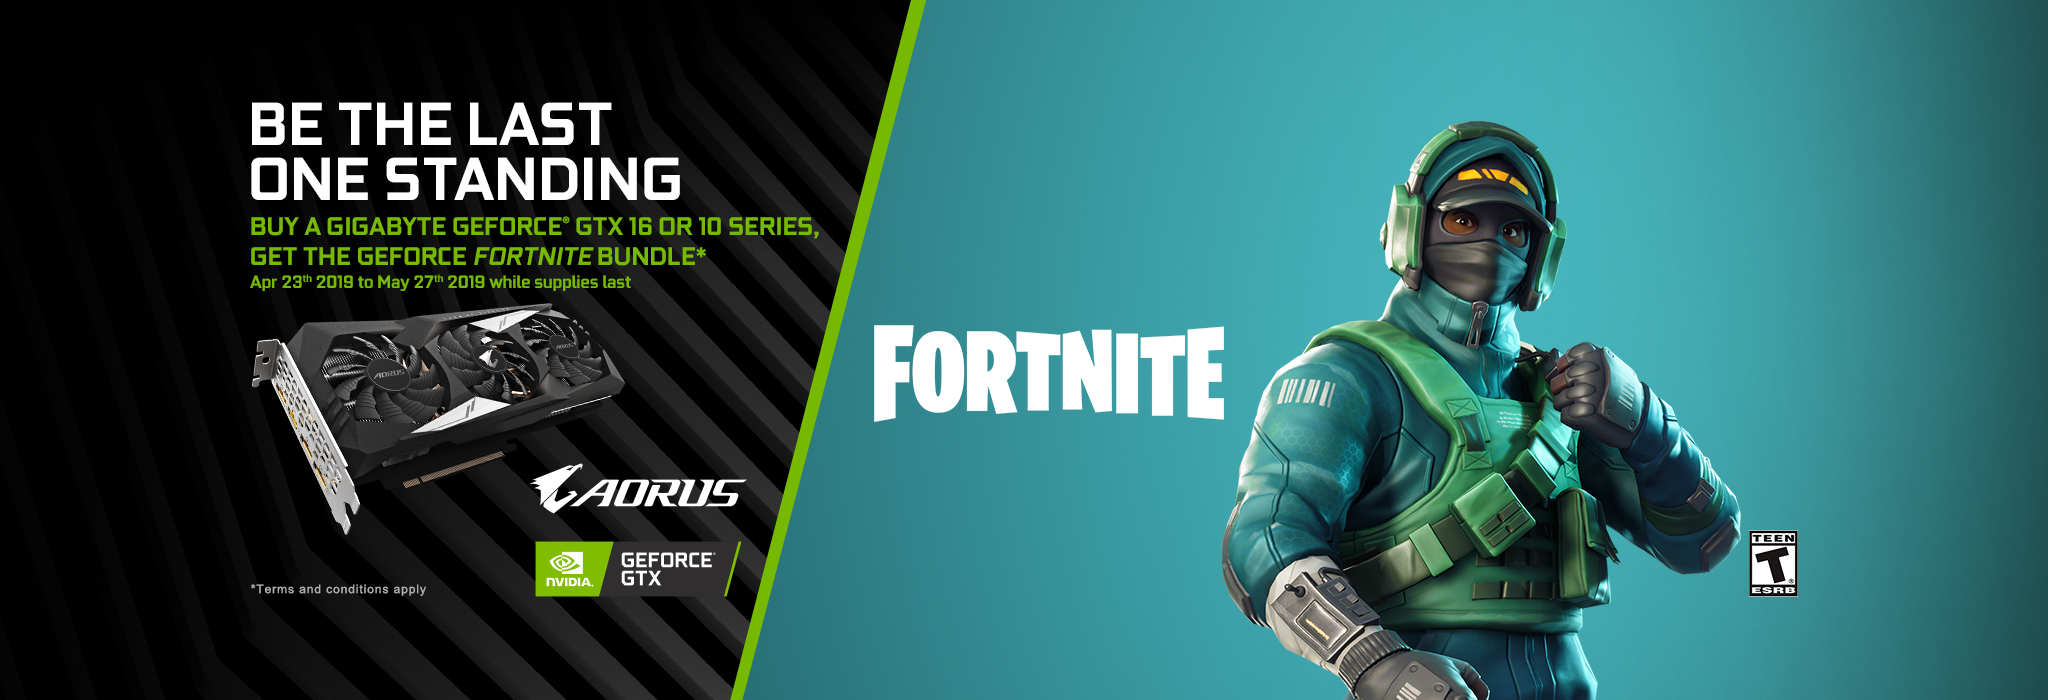 Buy A Qualified Gigabyte Gtx And Get Fortnite Bundle Apac Aorus - buy a qualified gigabyte geforce gtx 1660ti 1660 1650 1070ti 1070 1060 1050ti and 1050 graphics cards and get the geforce fortnite bundle